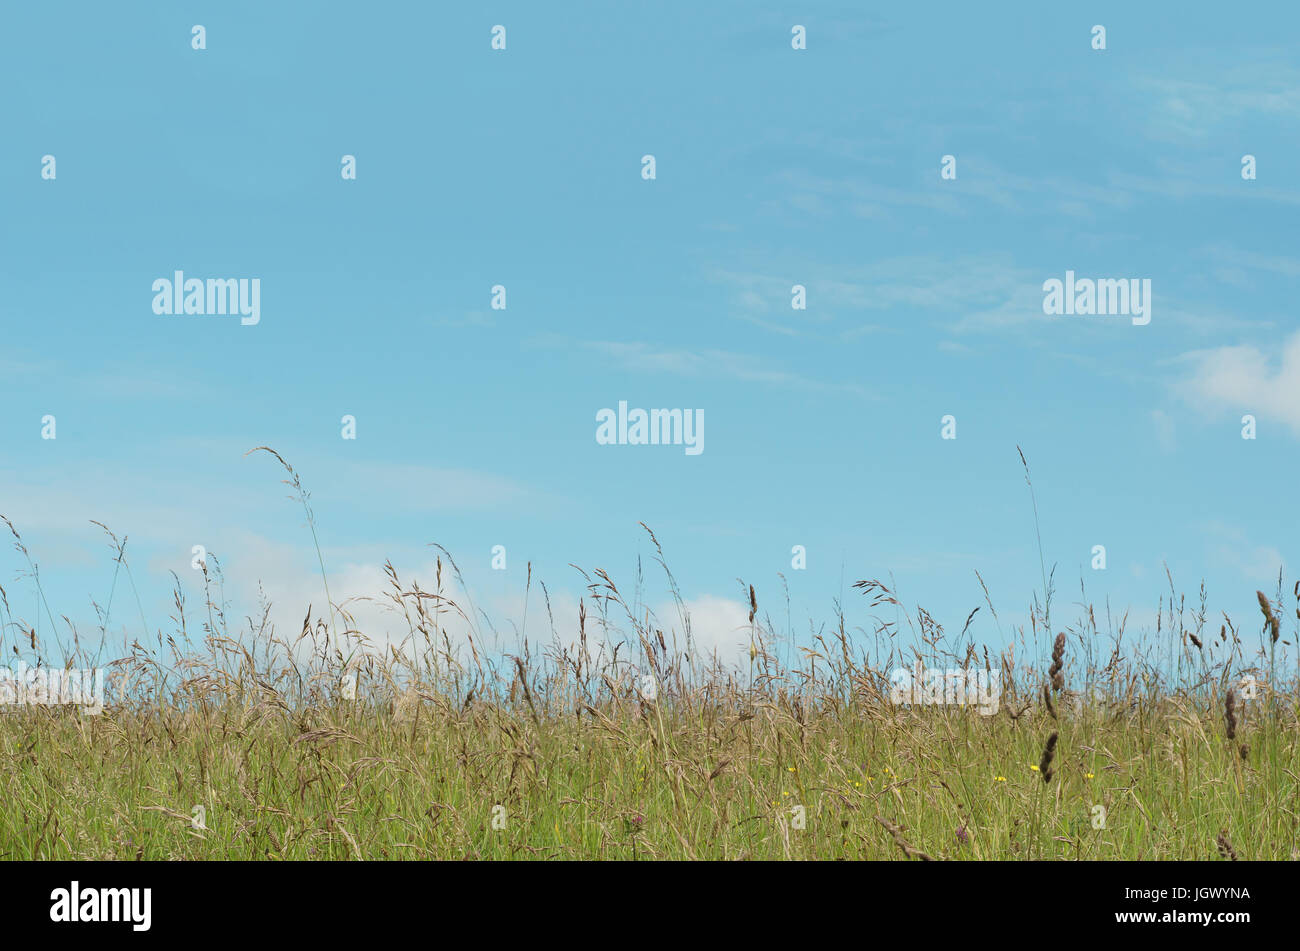 Nature background of a wild green meadow with a variety of long grasses and dandelions, against a blue sky on a bright day in June. Stock Photo